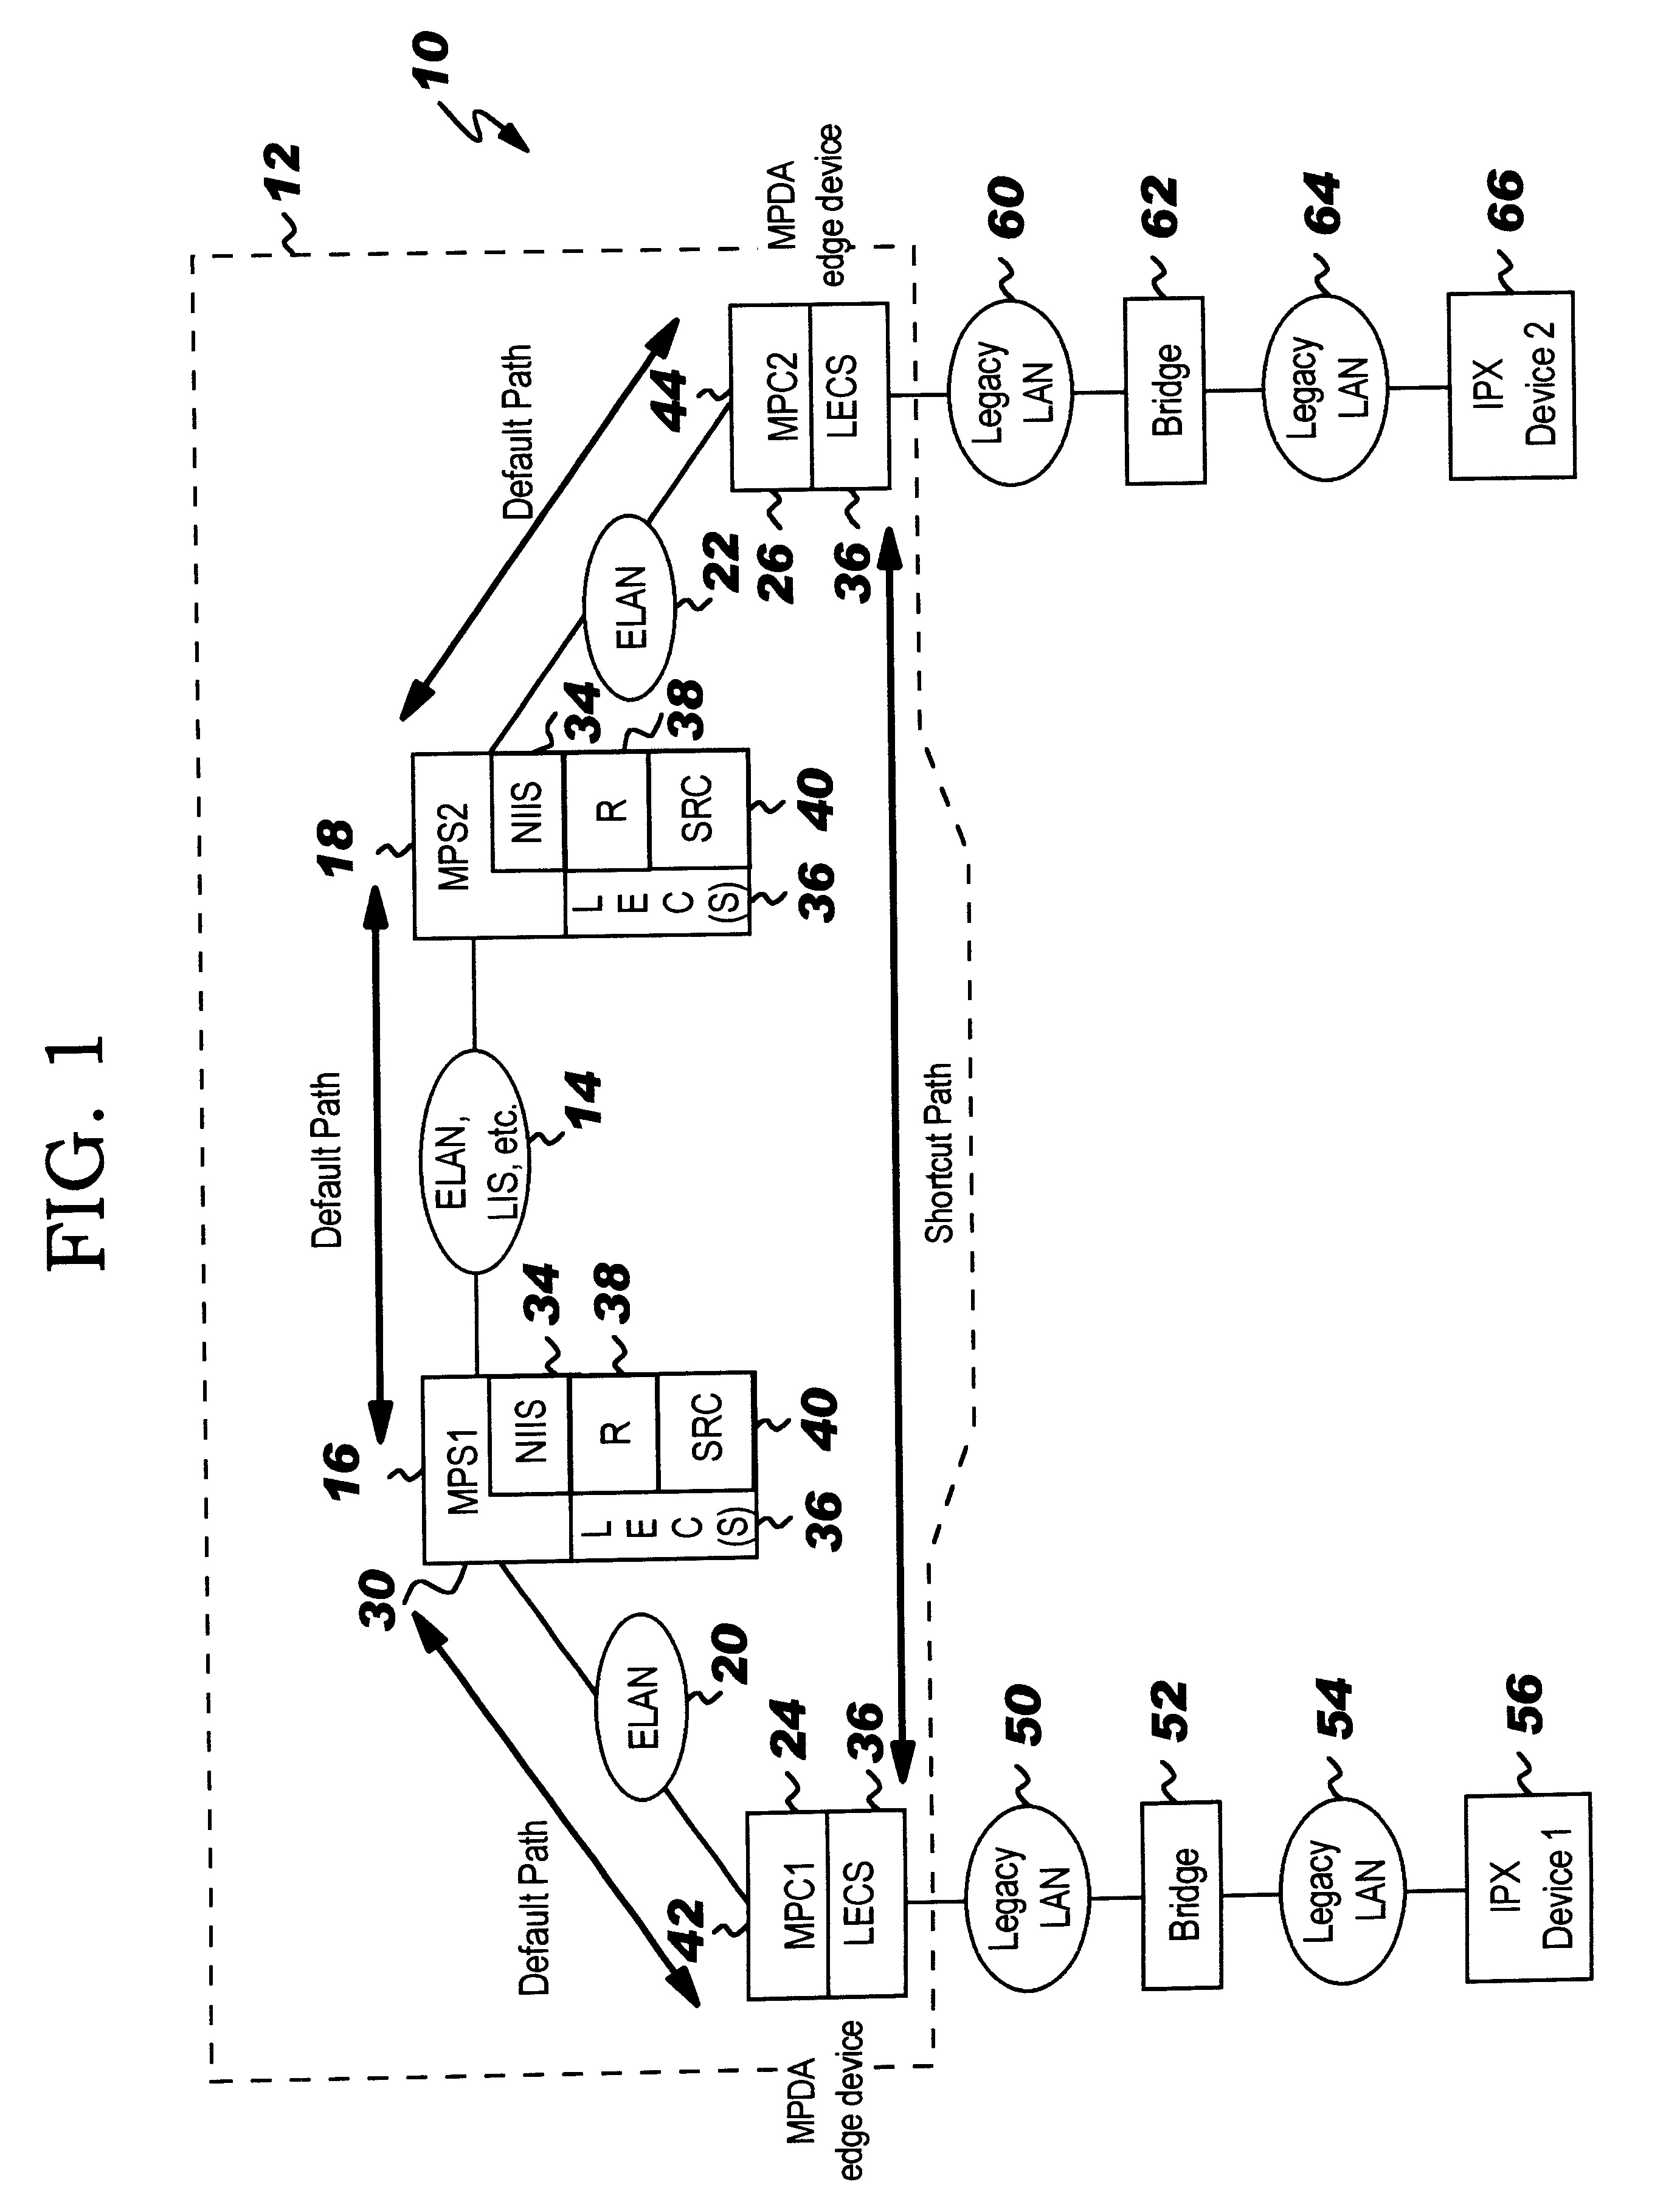 Method and system within a computer network for maintaining source-route information at a router bypassed by shortcut communication